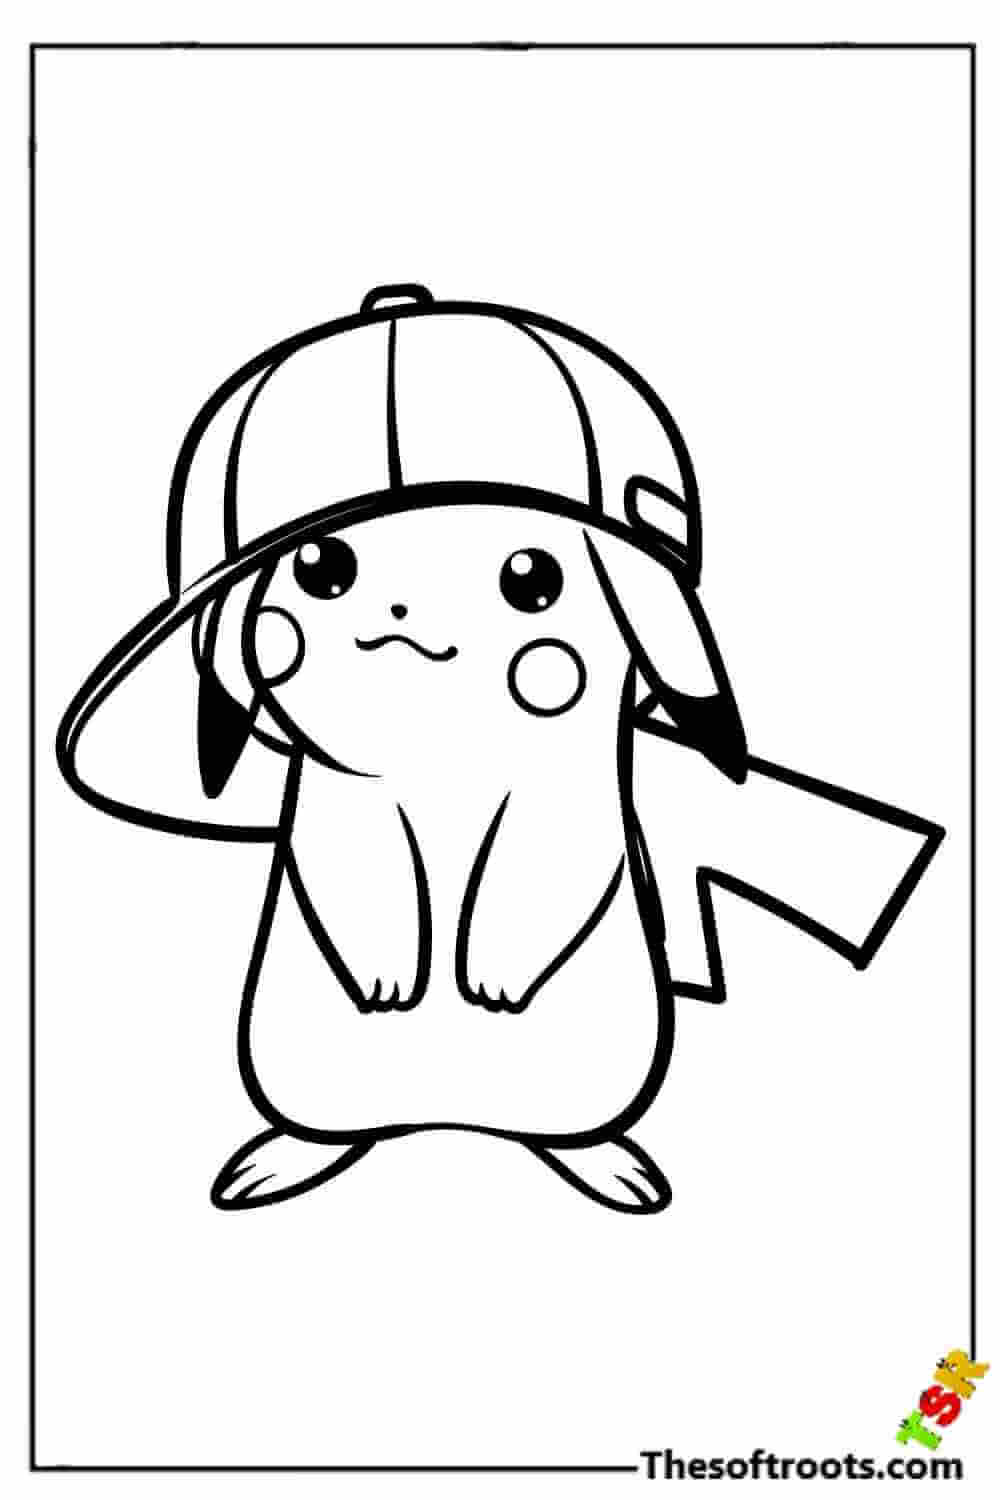 Pikachu wearing a cap coloring pages